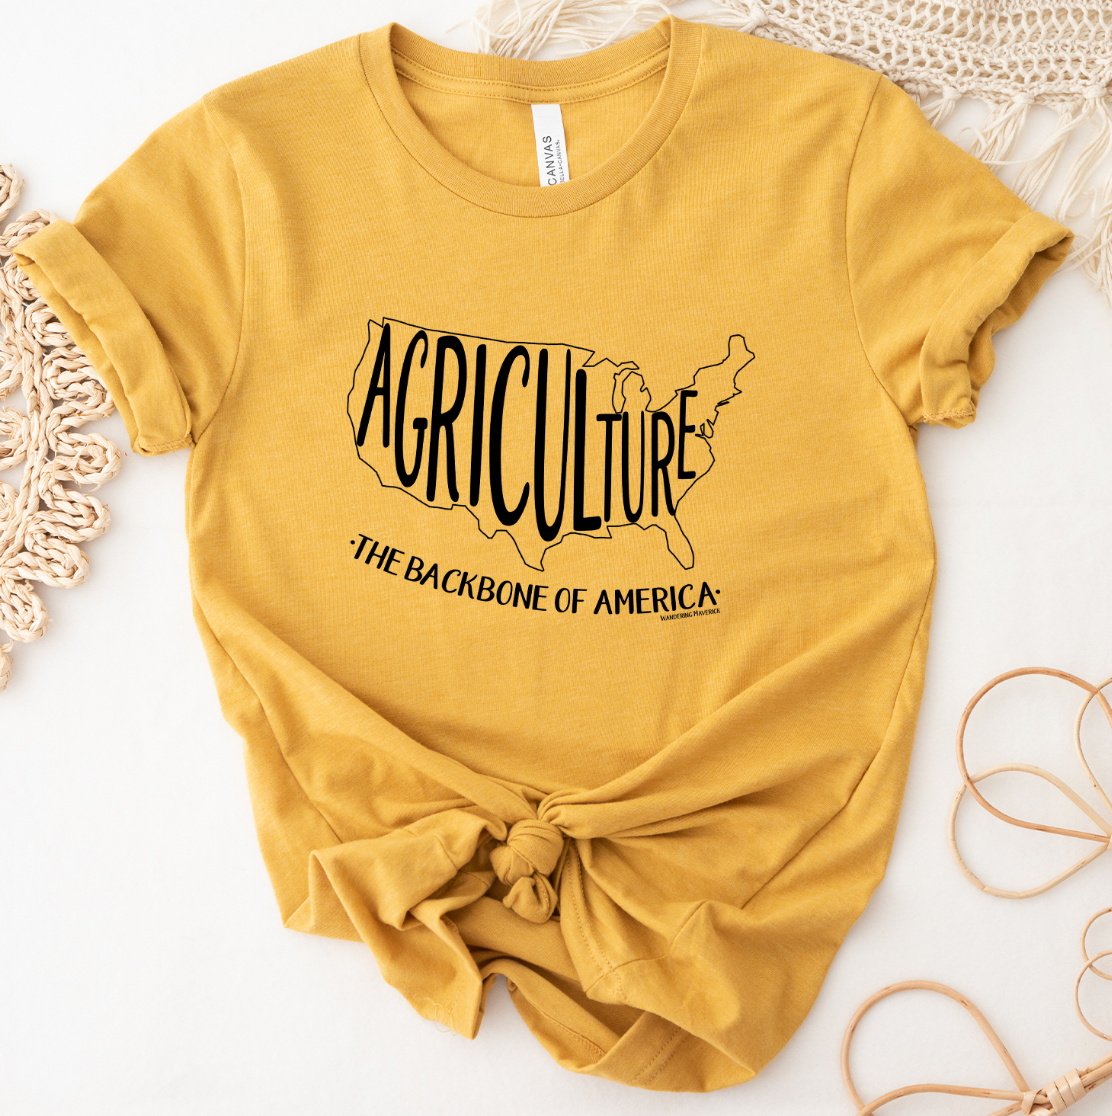 Agriculture Is The Backbone of America T-Shirt (XS-4XL) - Multiple Colors!